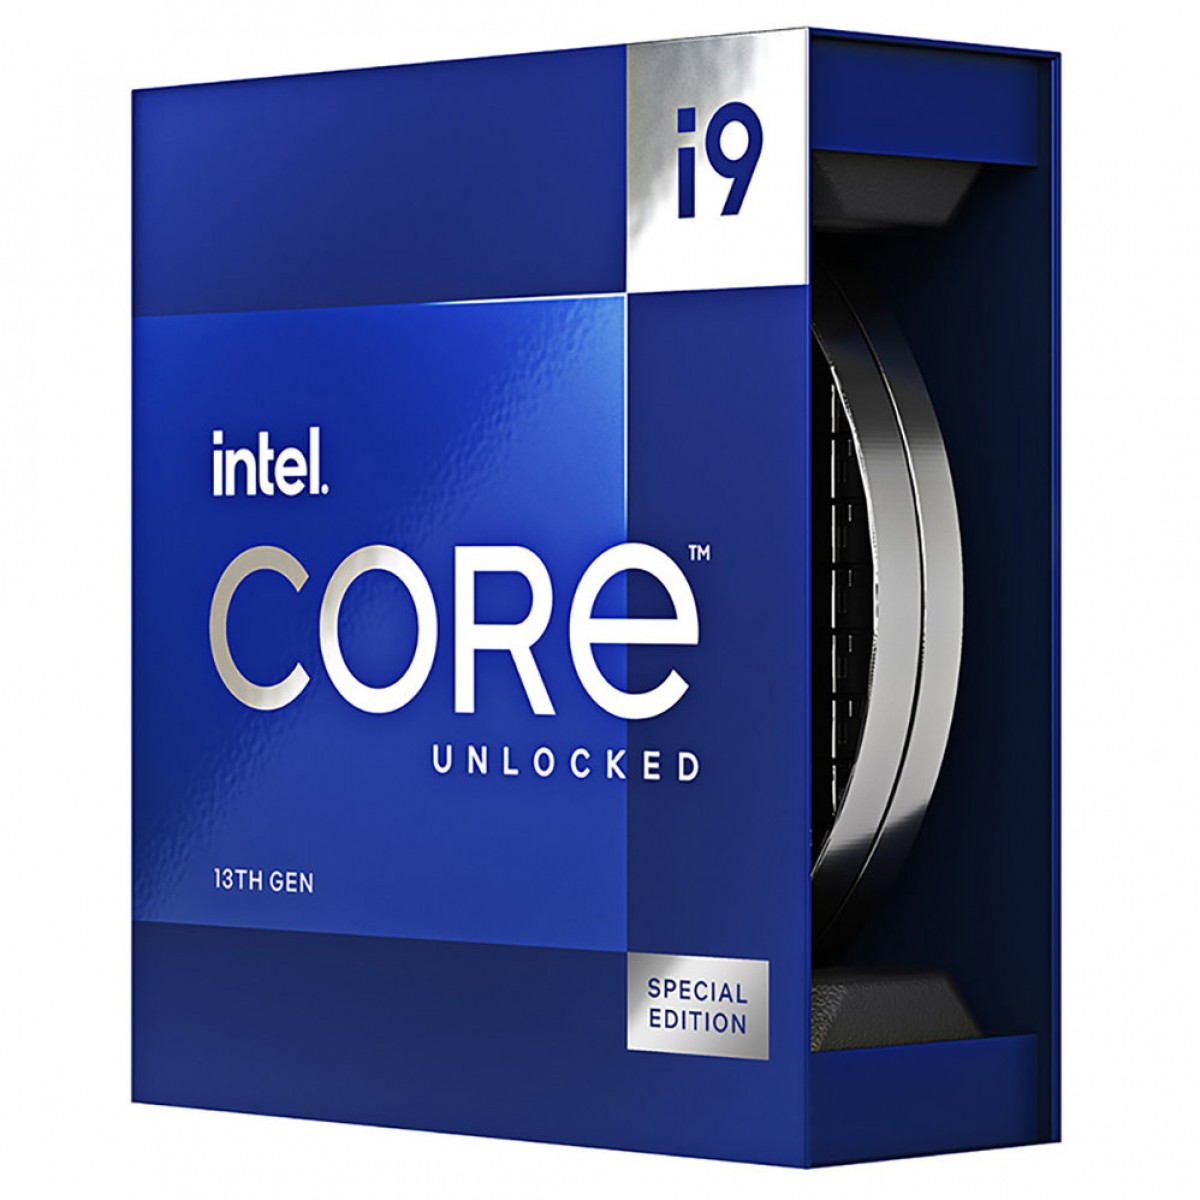 Intel Core i9-13900KS announced with the world's first 6.0GHz max turbo frequency